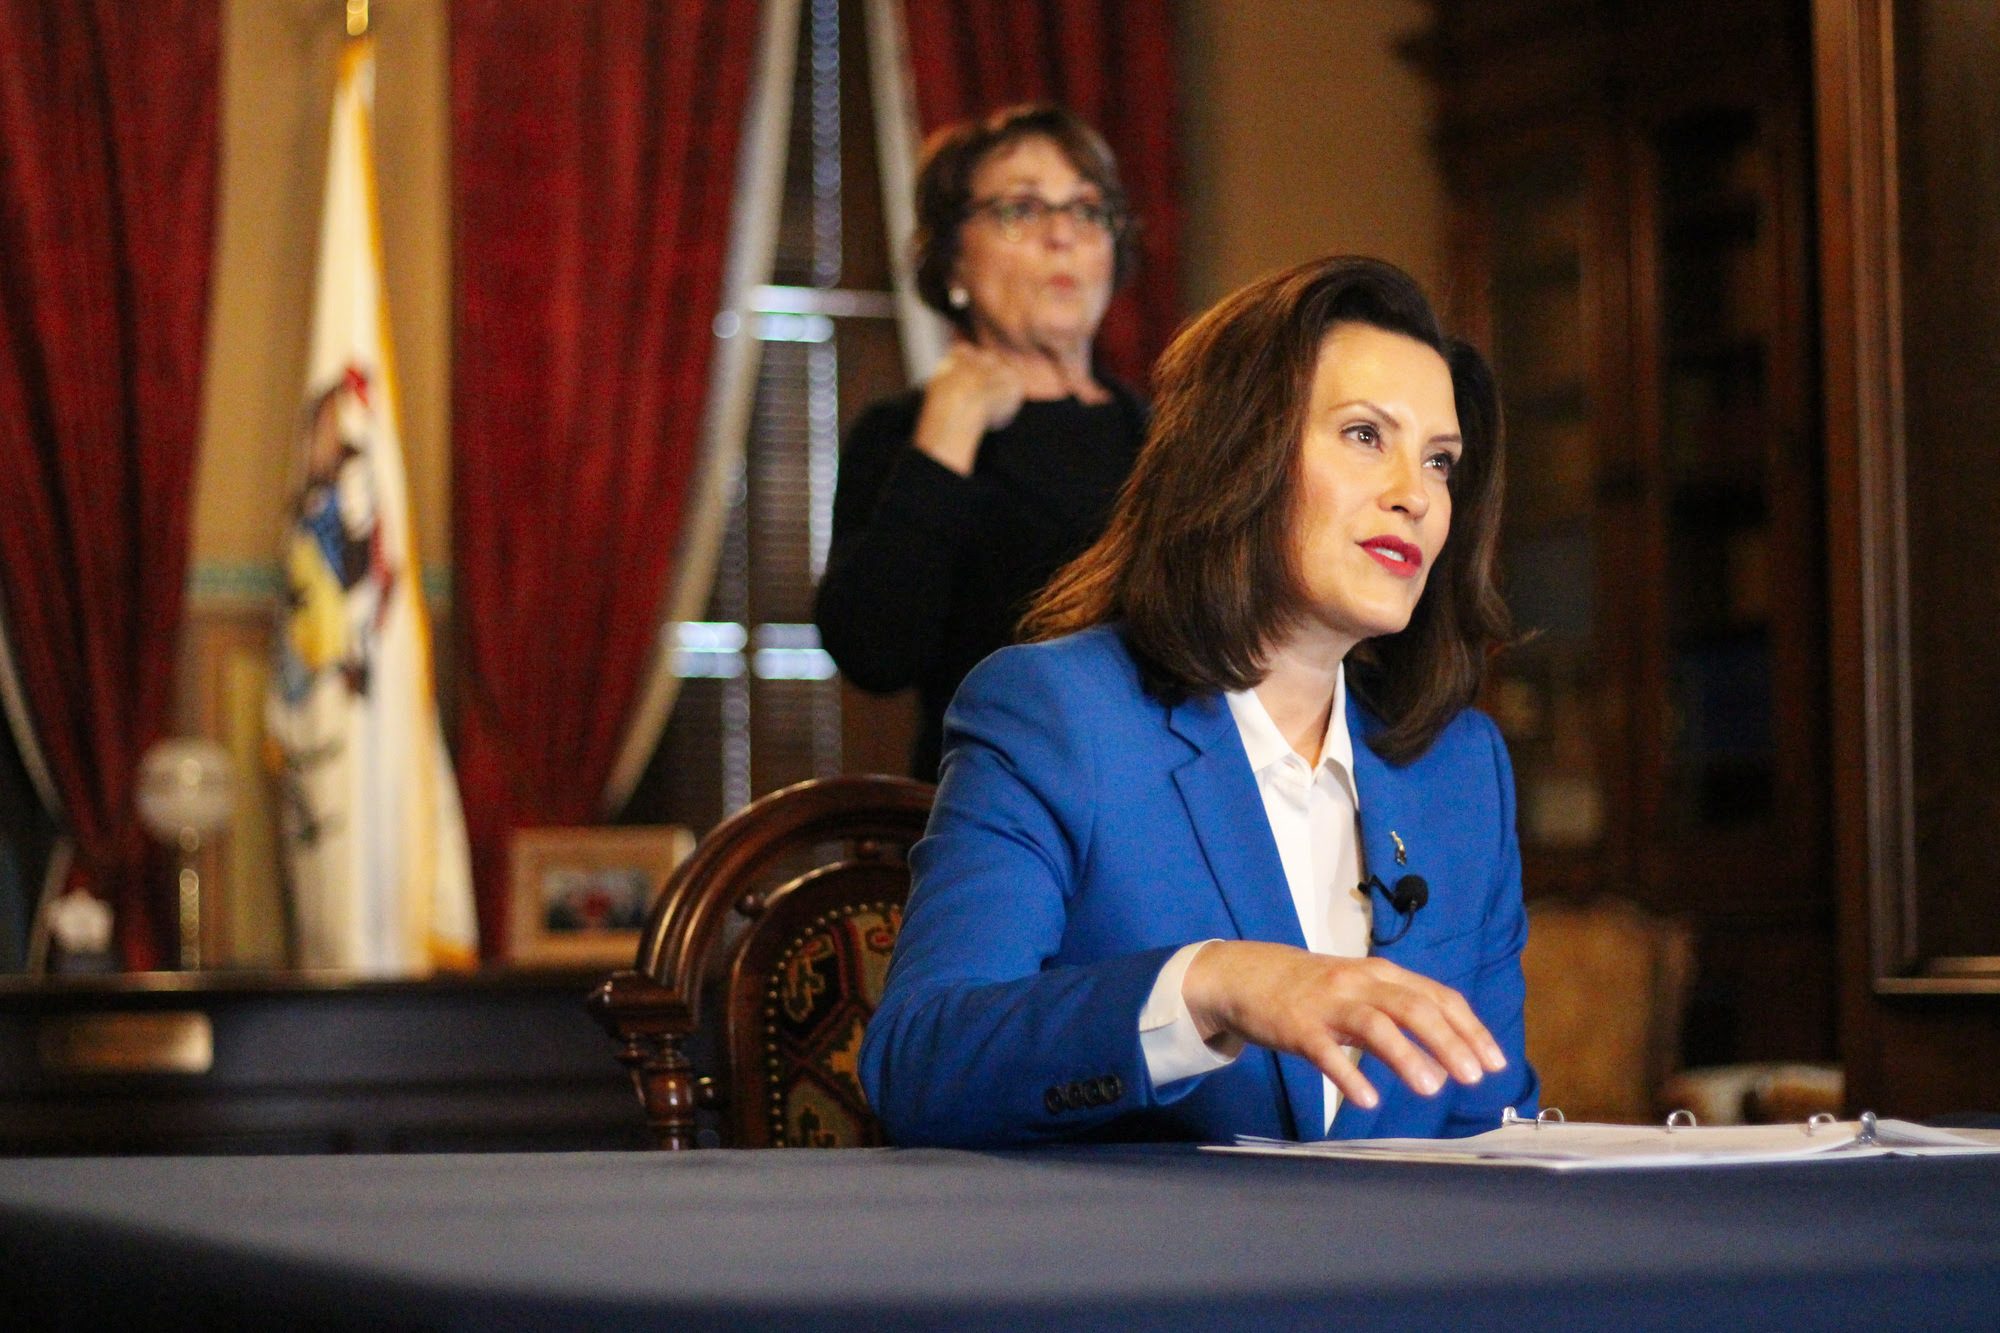 Whitmer issues ‘stay at home’ order amid COVID-19 pandemic